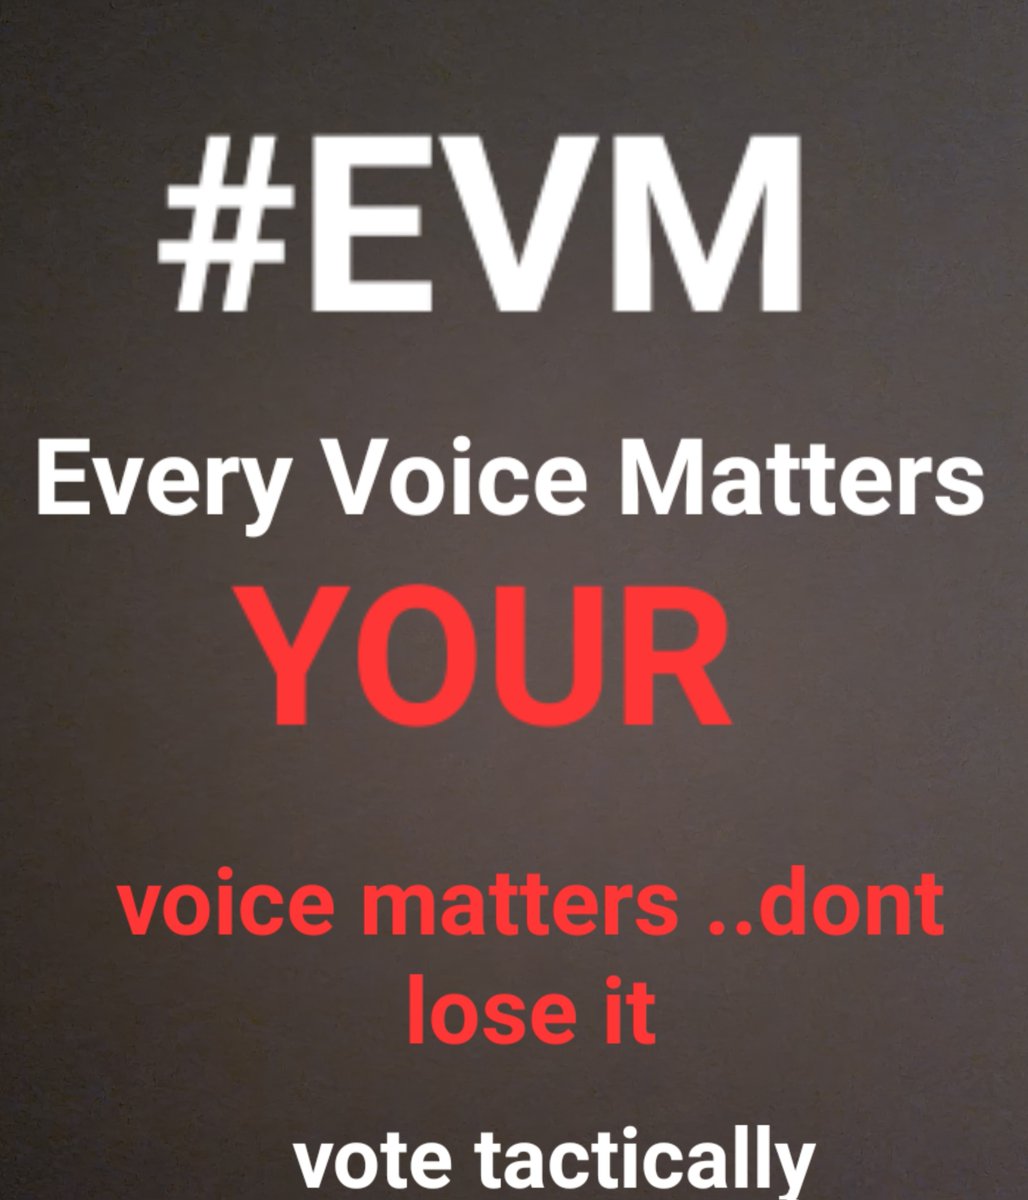 #EVM EVERY voice .atters...together let's get #ToriesOut664  
#GeneralElectionNow #JackanoryTorys 
#Bregret